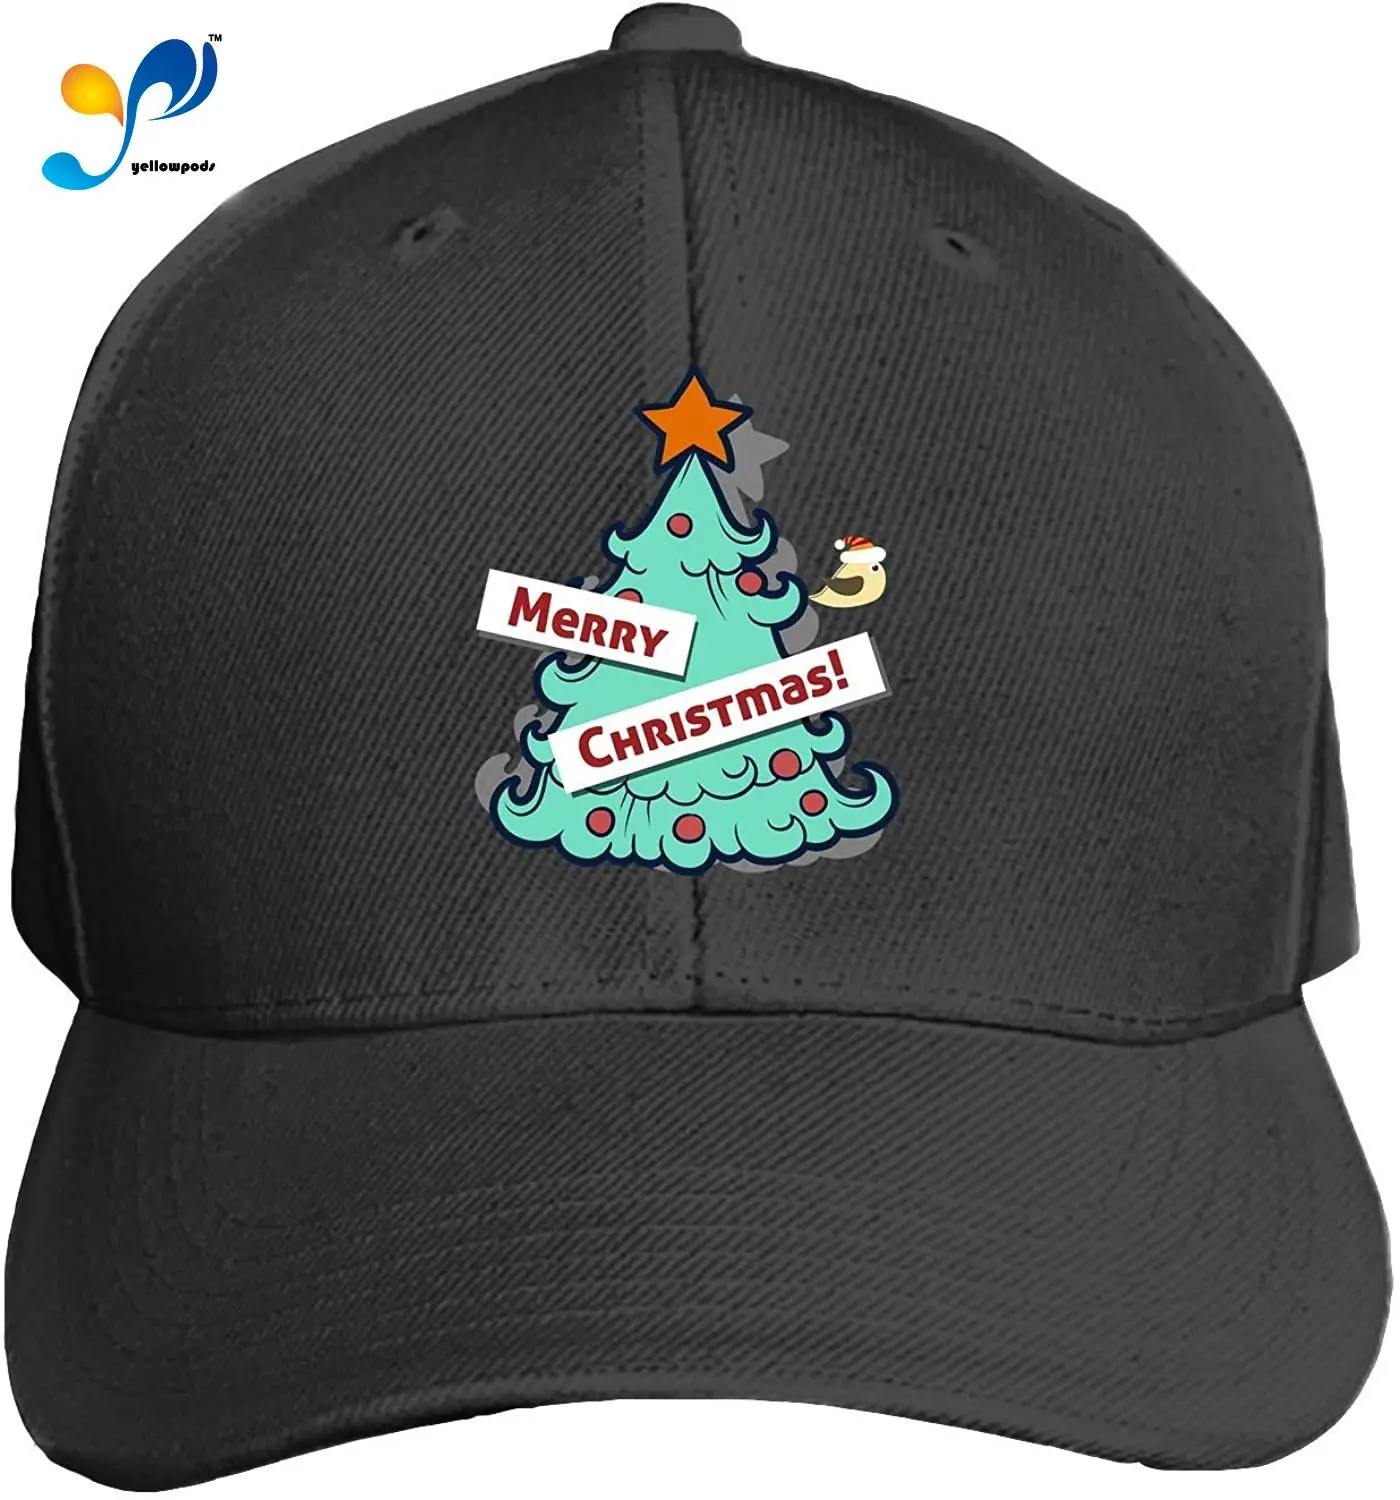 

Merry Christmas Men's Structured Twill Cap Adjustable Peaked Sandwich Hat